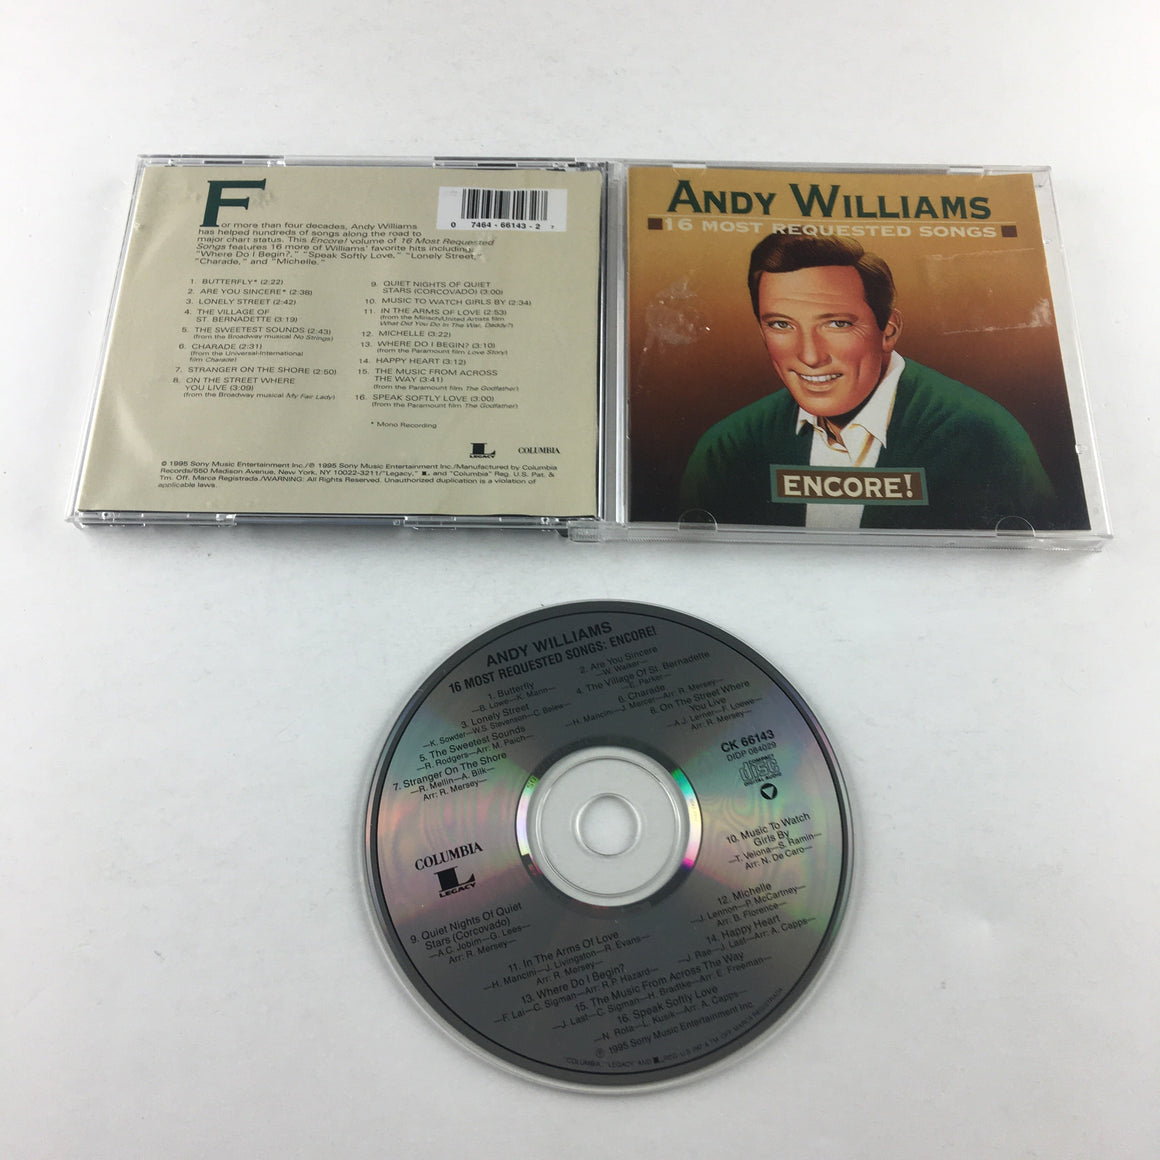 Andy Williams 16 Most Requested Songs: Encore! Used CD VG+\VG